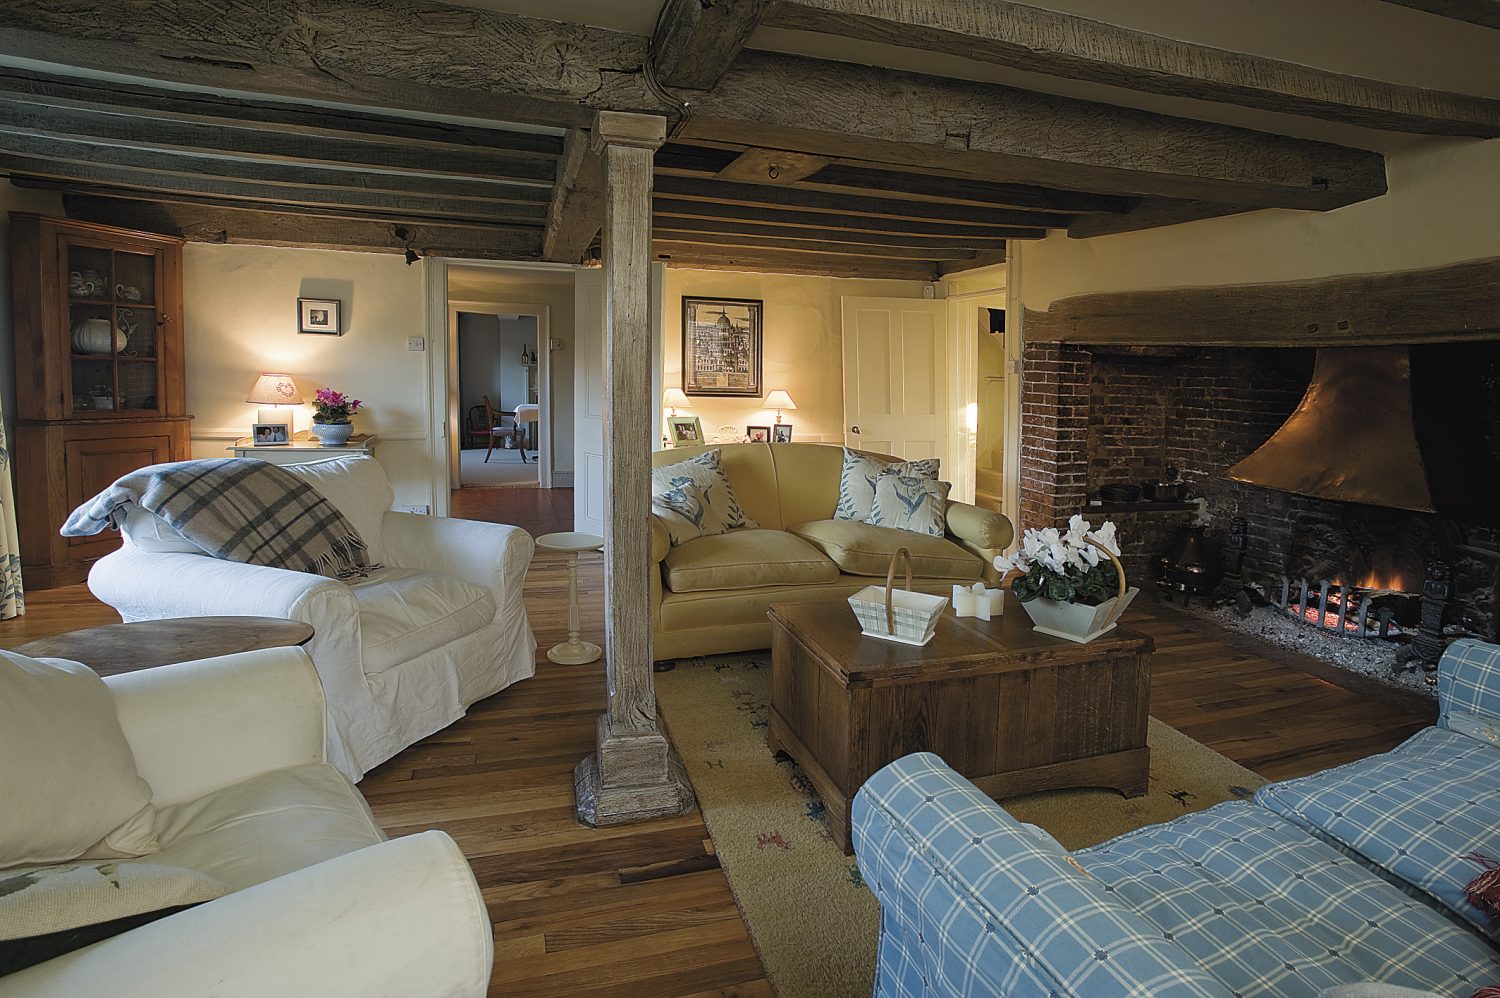 the sitting room was originally the farmhouse kitchen. The beams have been sanded, limed and waxed